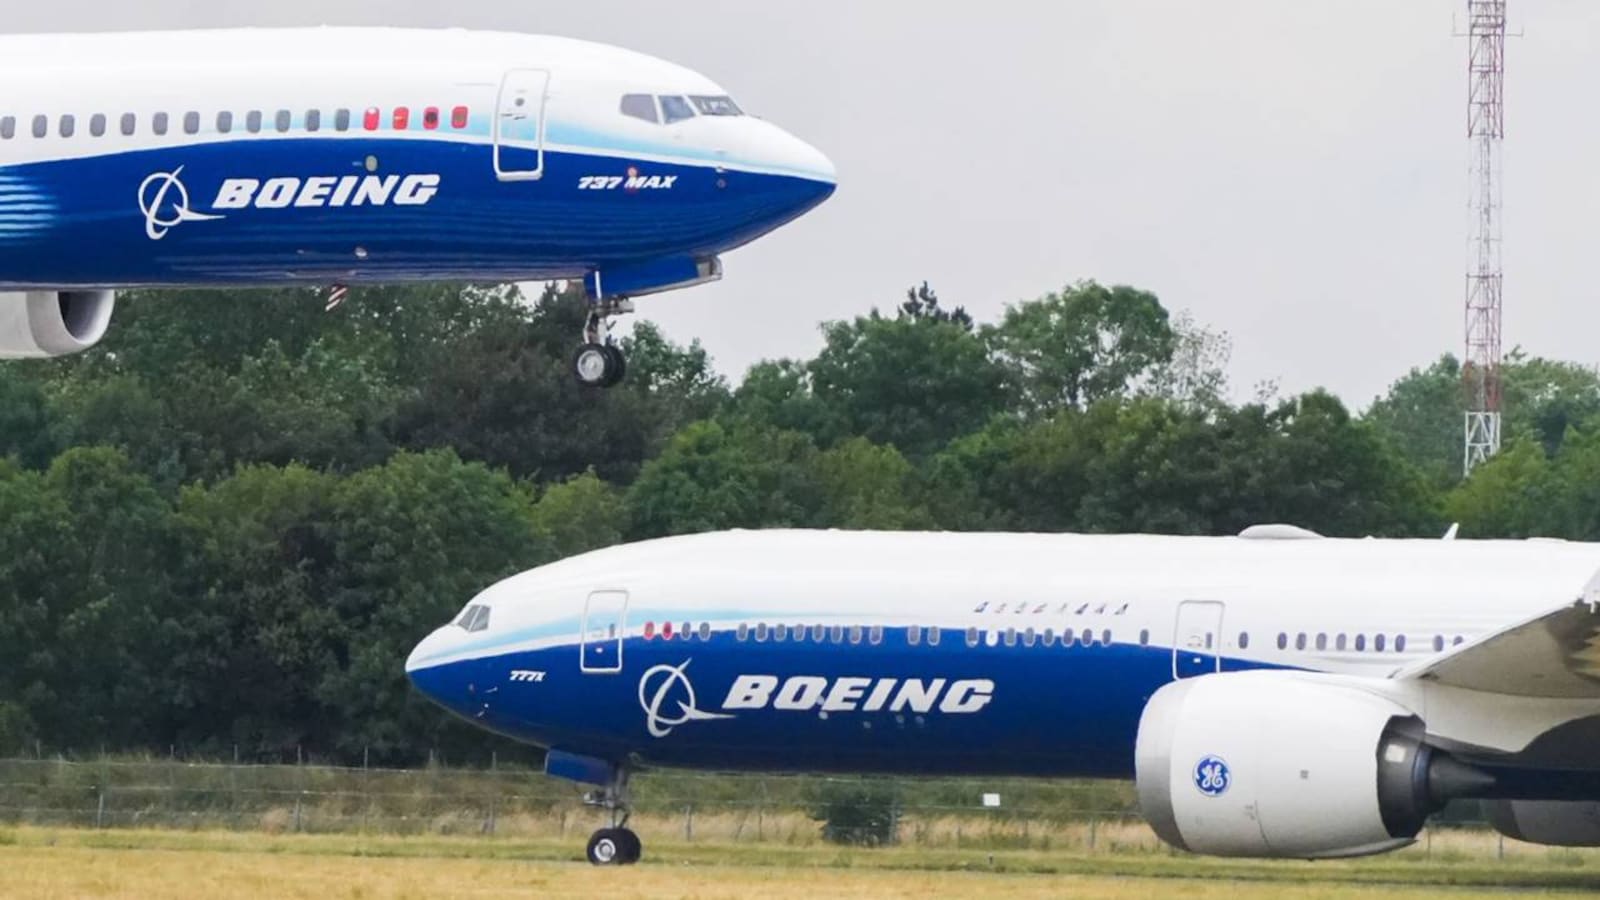 Boeing shares tumble, weighing on Dow